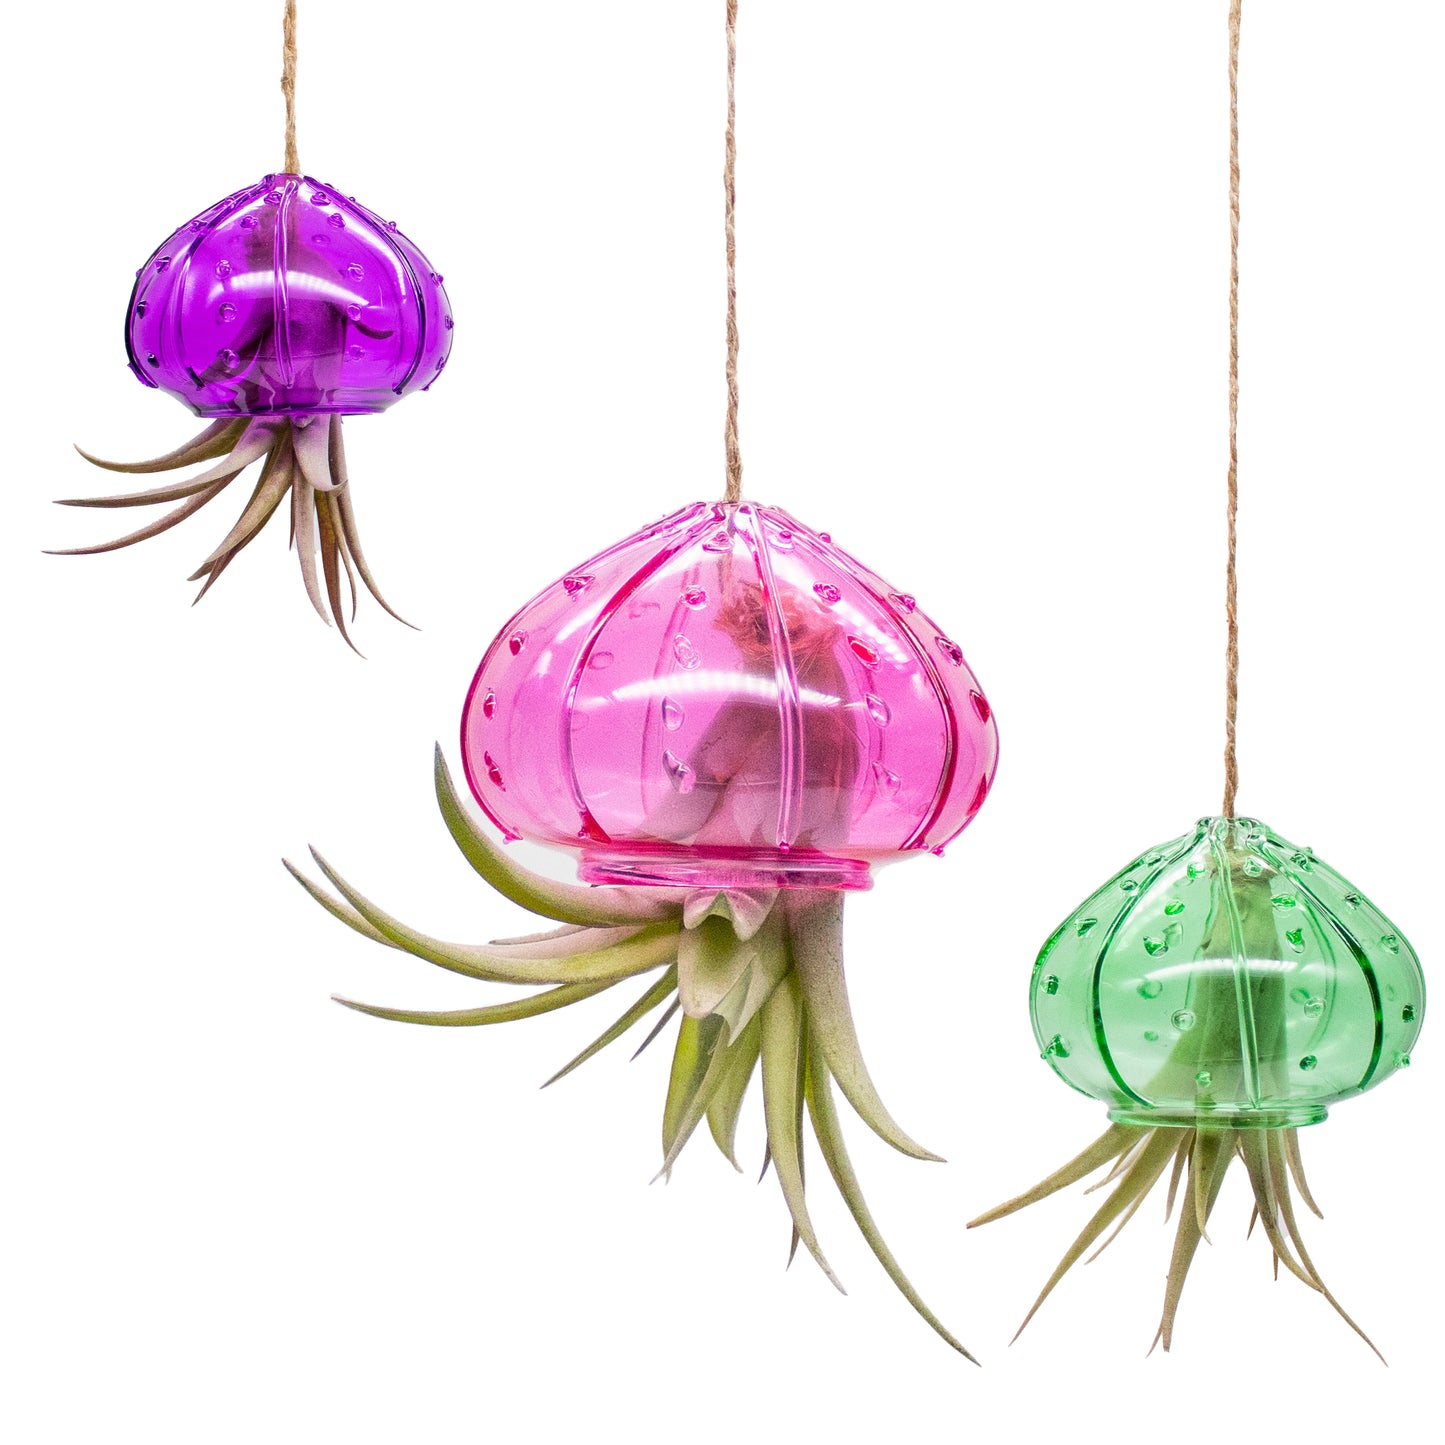 Glass Hanging Jellyfish with Tillandsia Assorted Air Plant - Set of 24